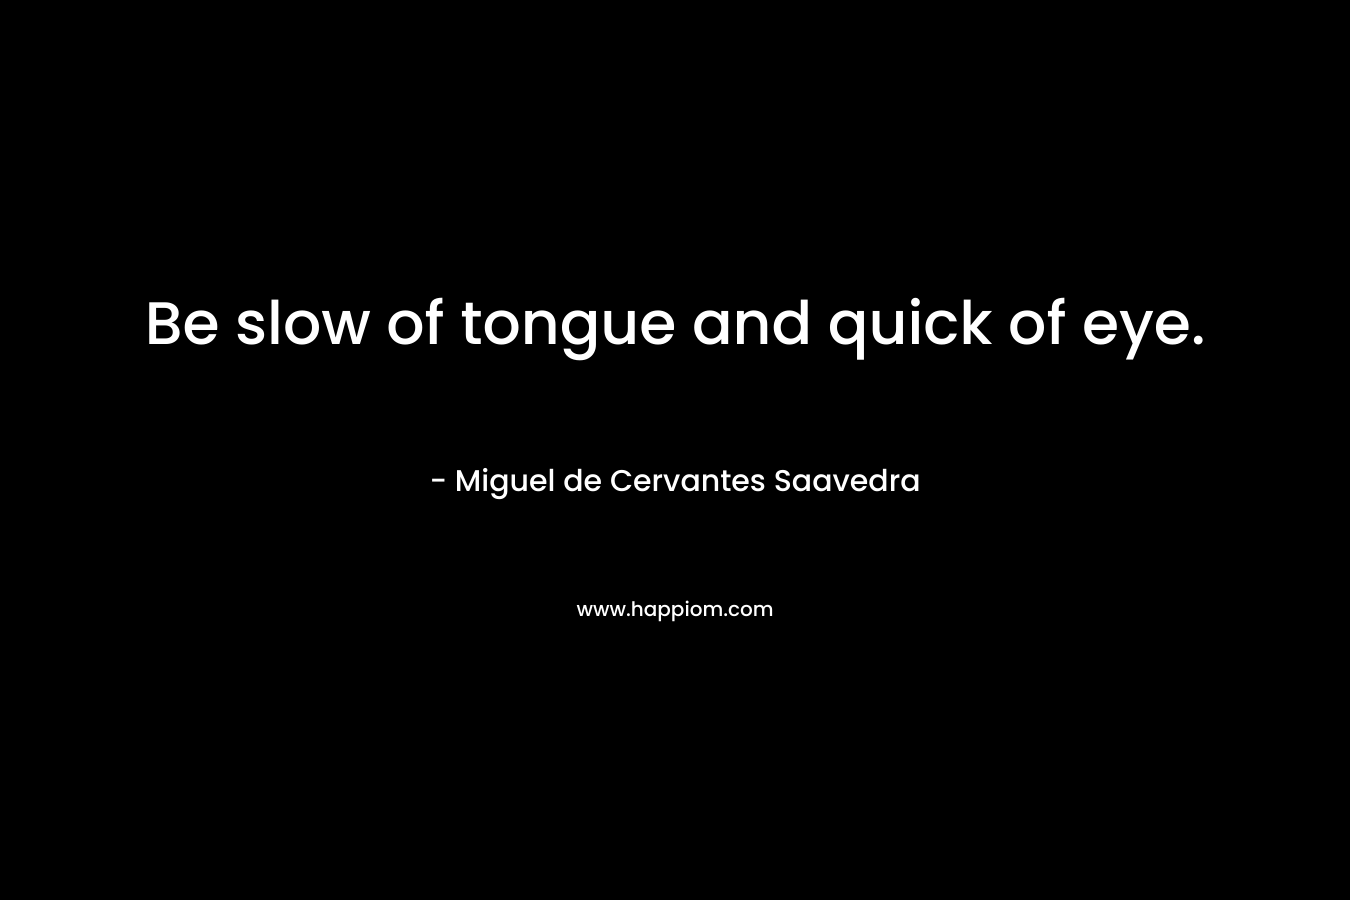 Be slow of tongue and quick of eye. – Miguel de Cervantes Saavedra